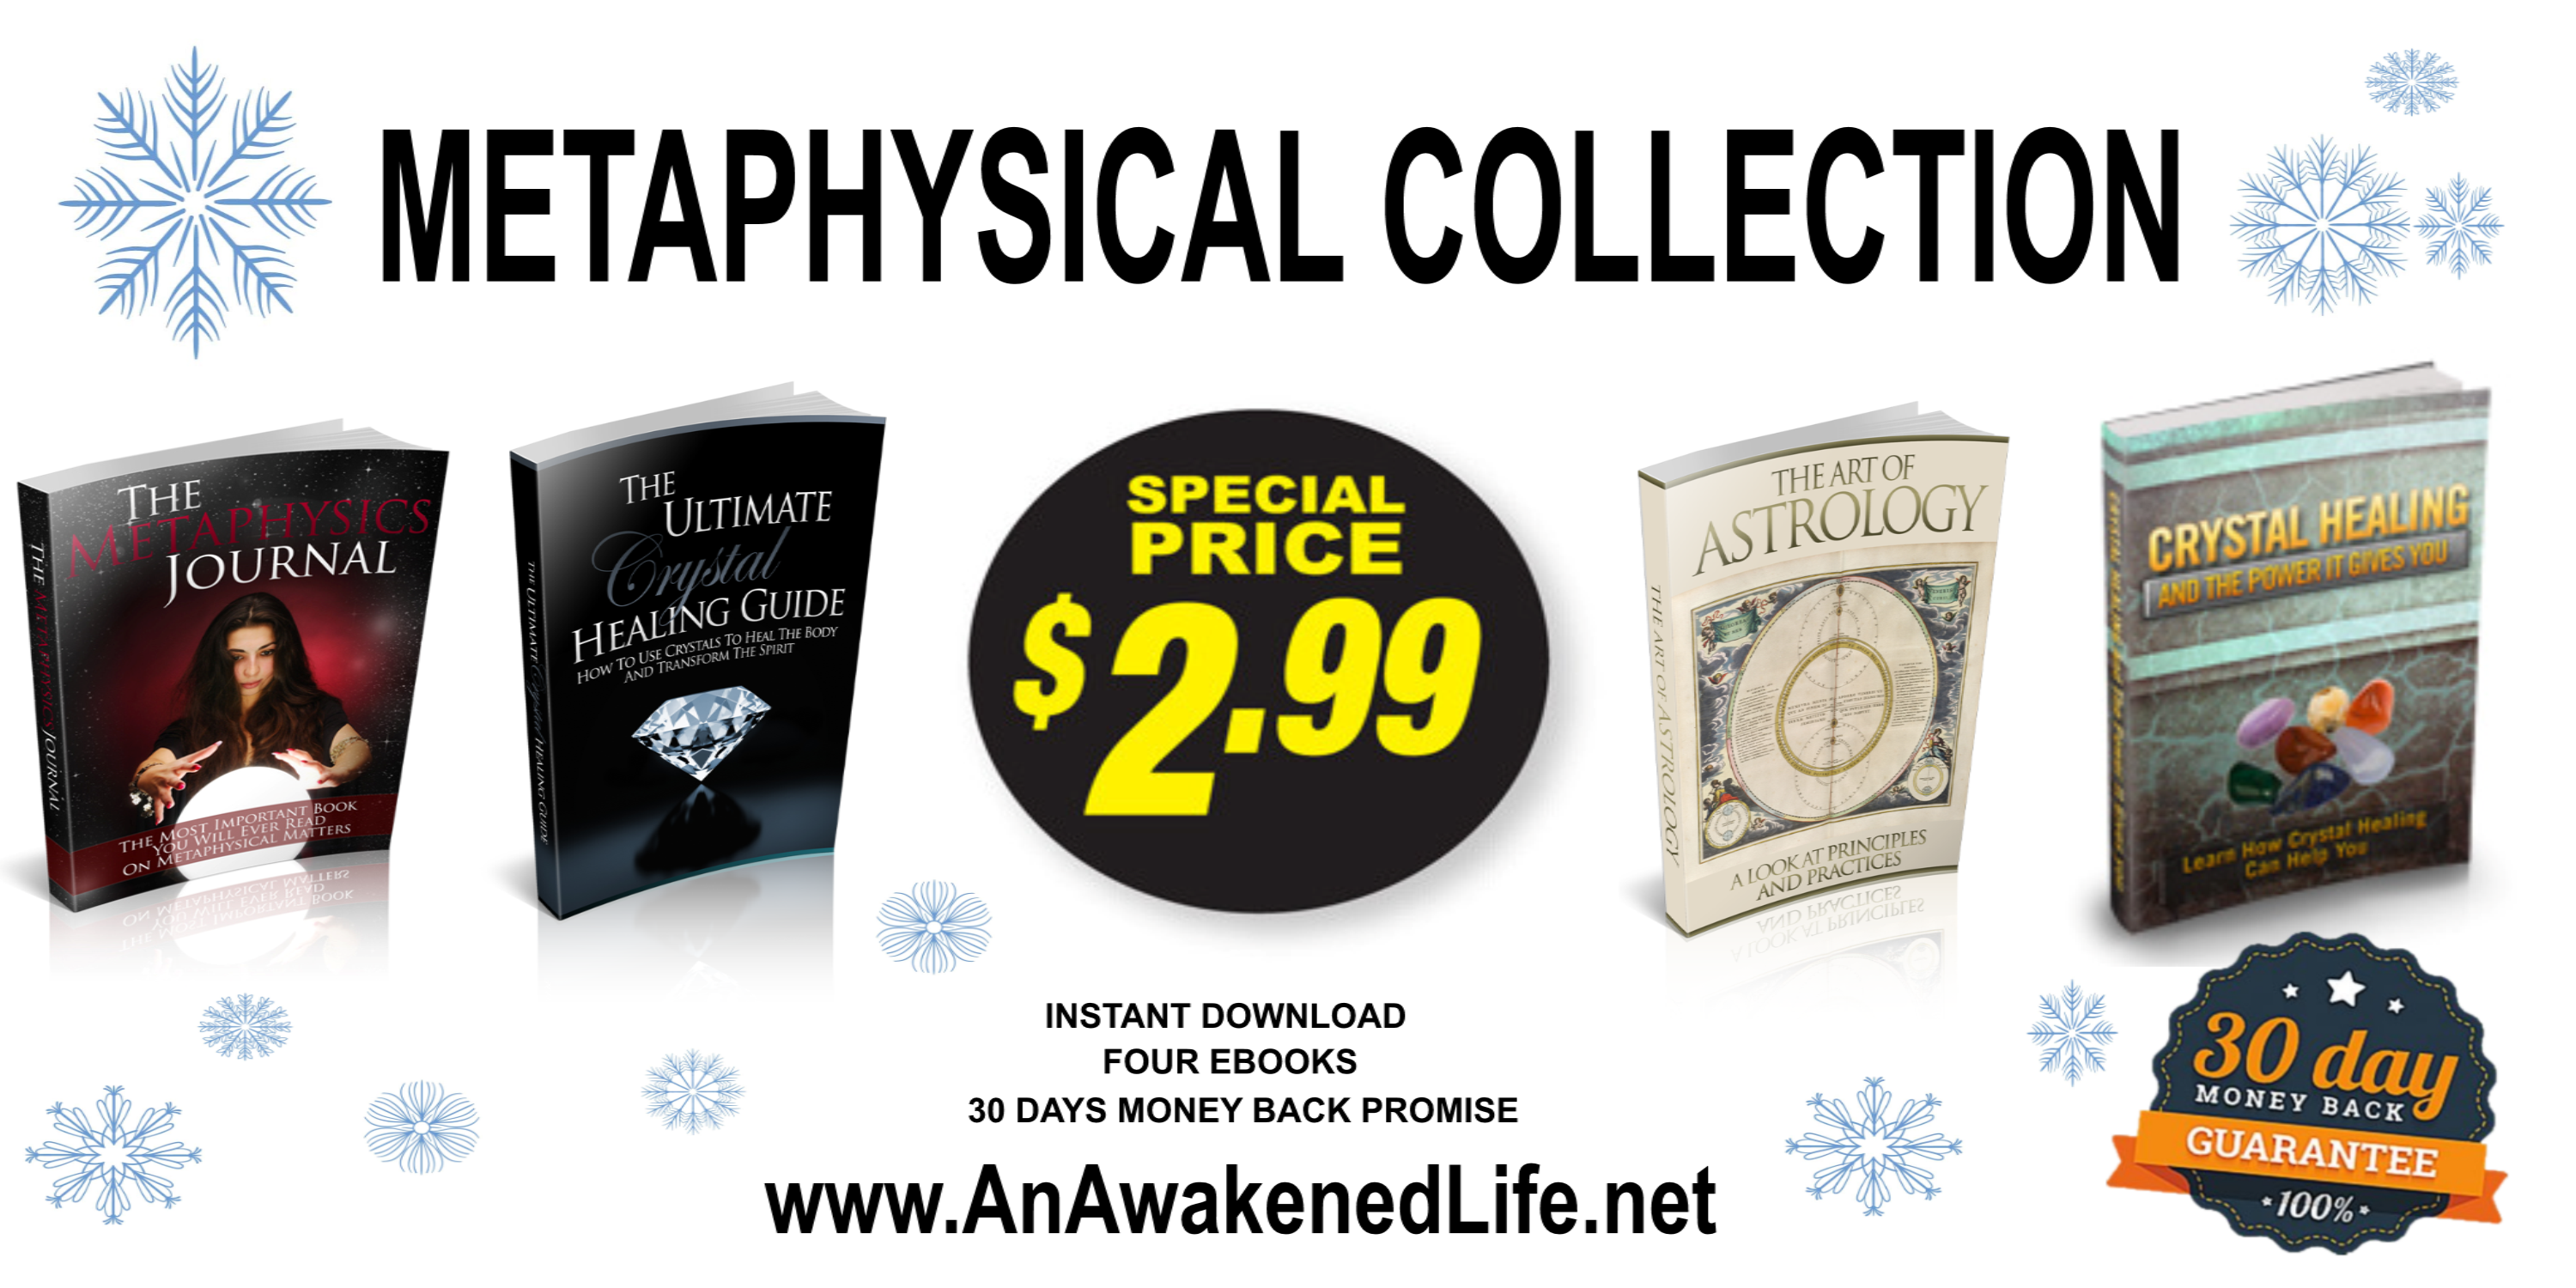 4 eBOOKS METAPHYSICAL COLLECTION